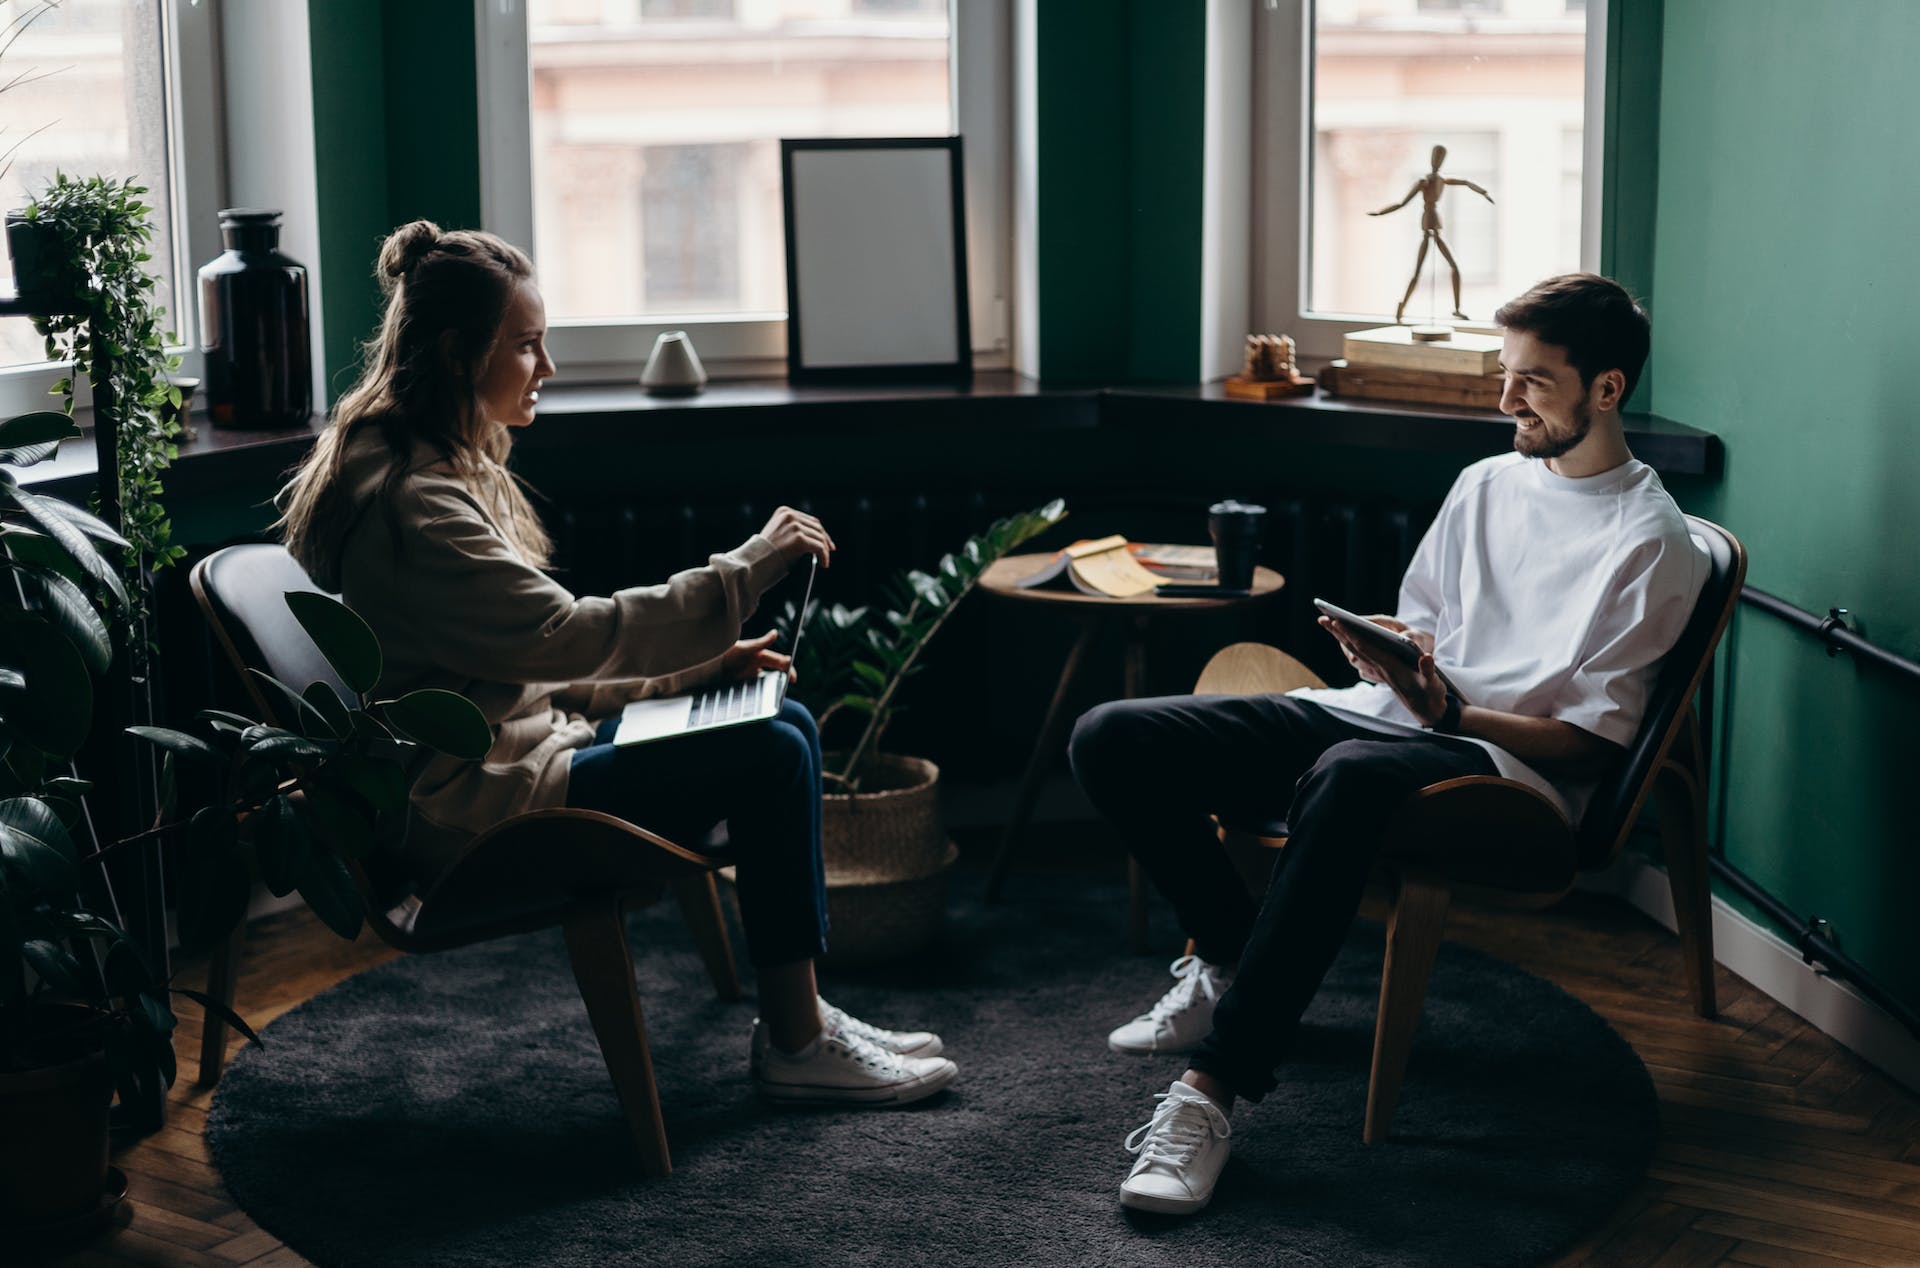 Man and woman working together in the office | Source: Pexels